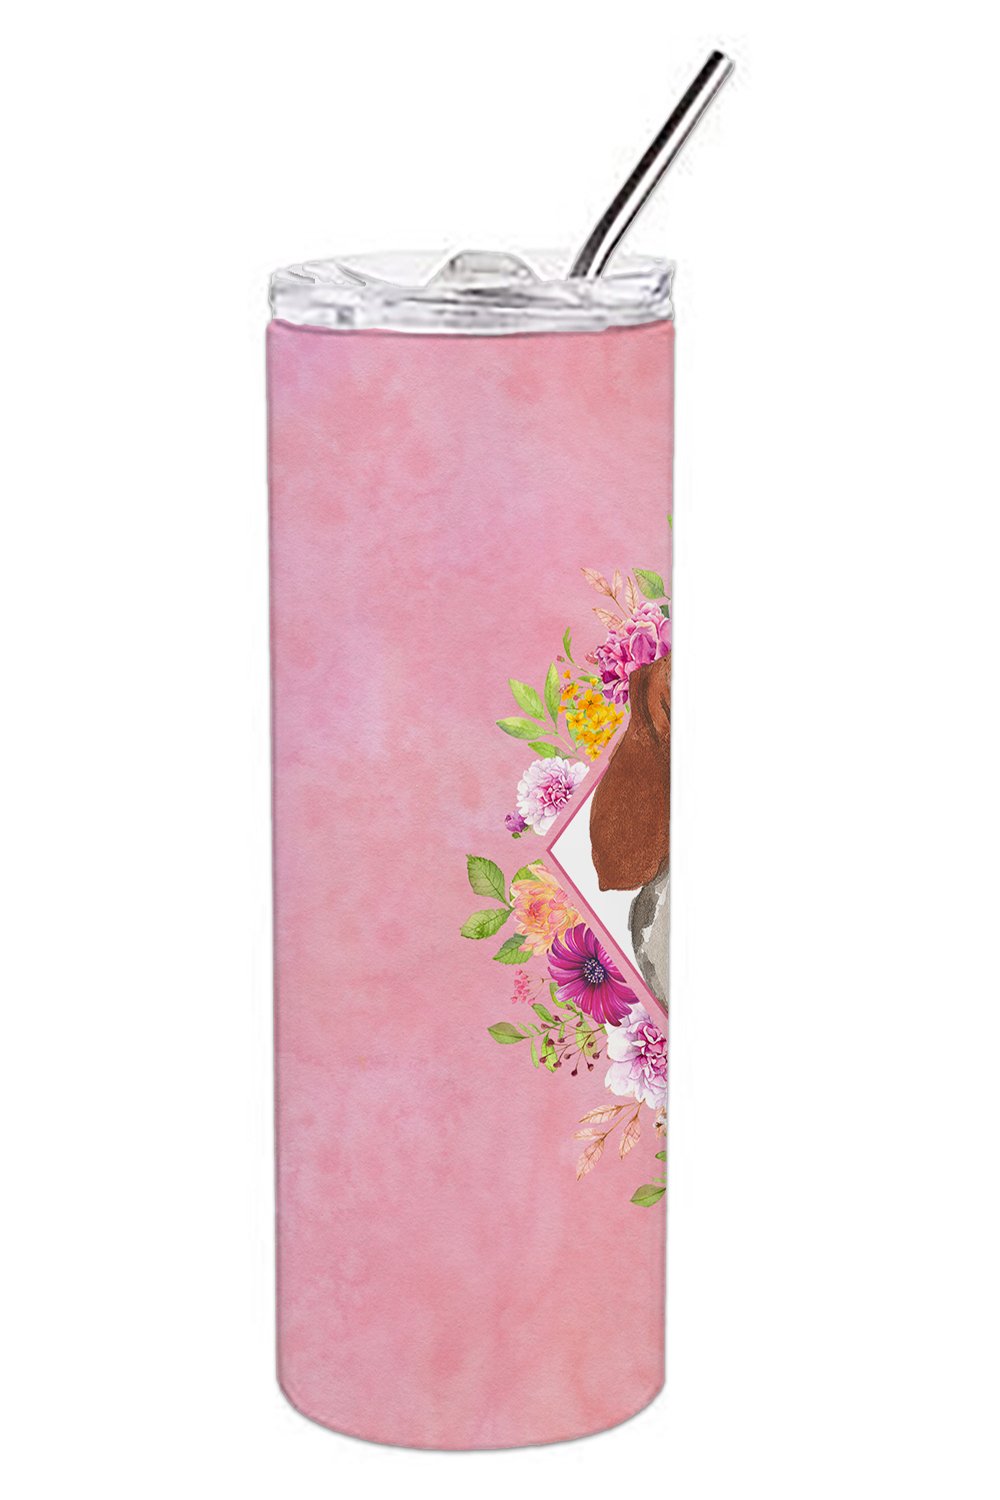 Basset Hound Pink Flowers Double Walled Stainless Steel 20 oz Skinny Tumbler CK4266TBL20 by Caroline's Treasures